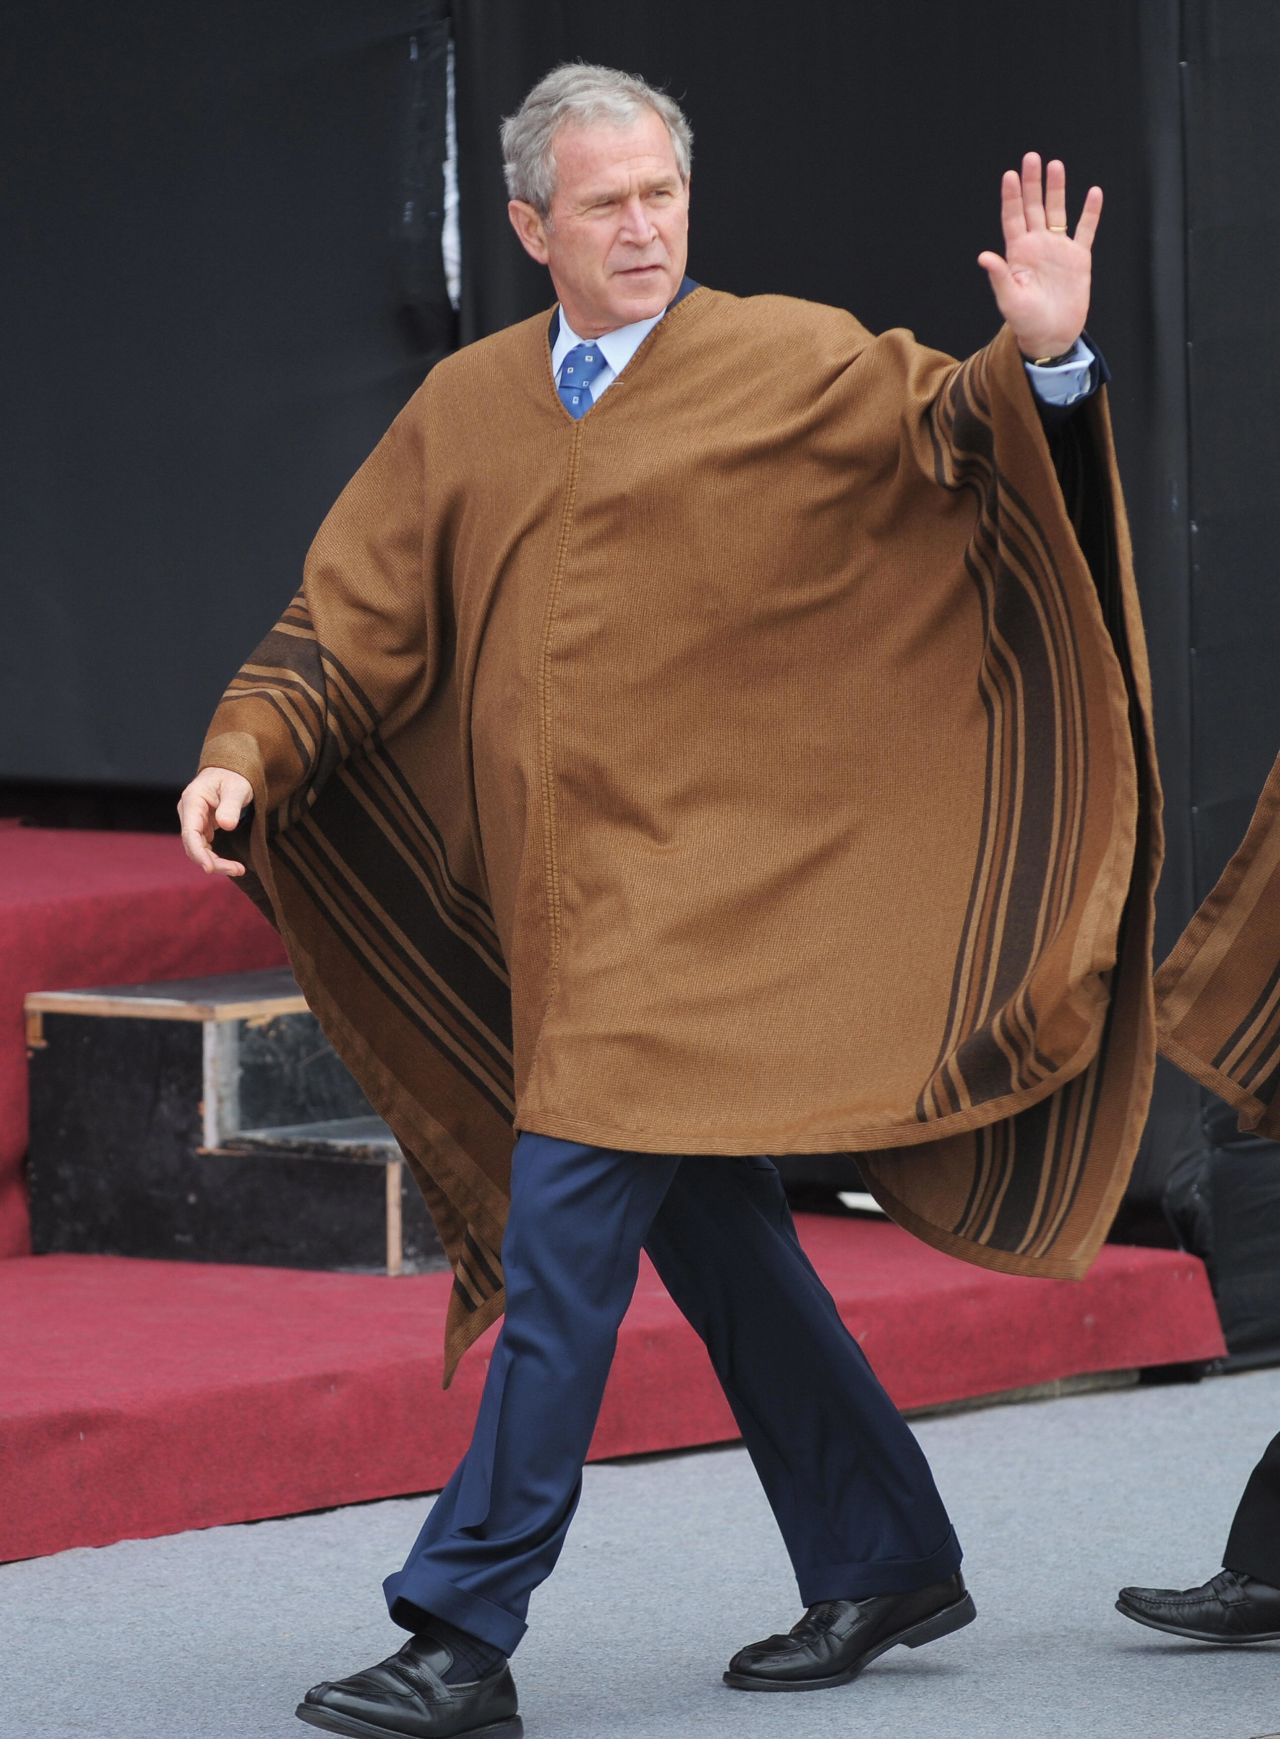 Say what you want, the man knew his way around a poncho. The Andean body drapes at APEC 2008 in Lima, Peru, were made from <a href="http://cnsnews.com/news/article/apec-leaders-don-andean-ponchos-group-photo" target="_blank" target="_blank">baby alpaca shearings</a>.